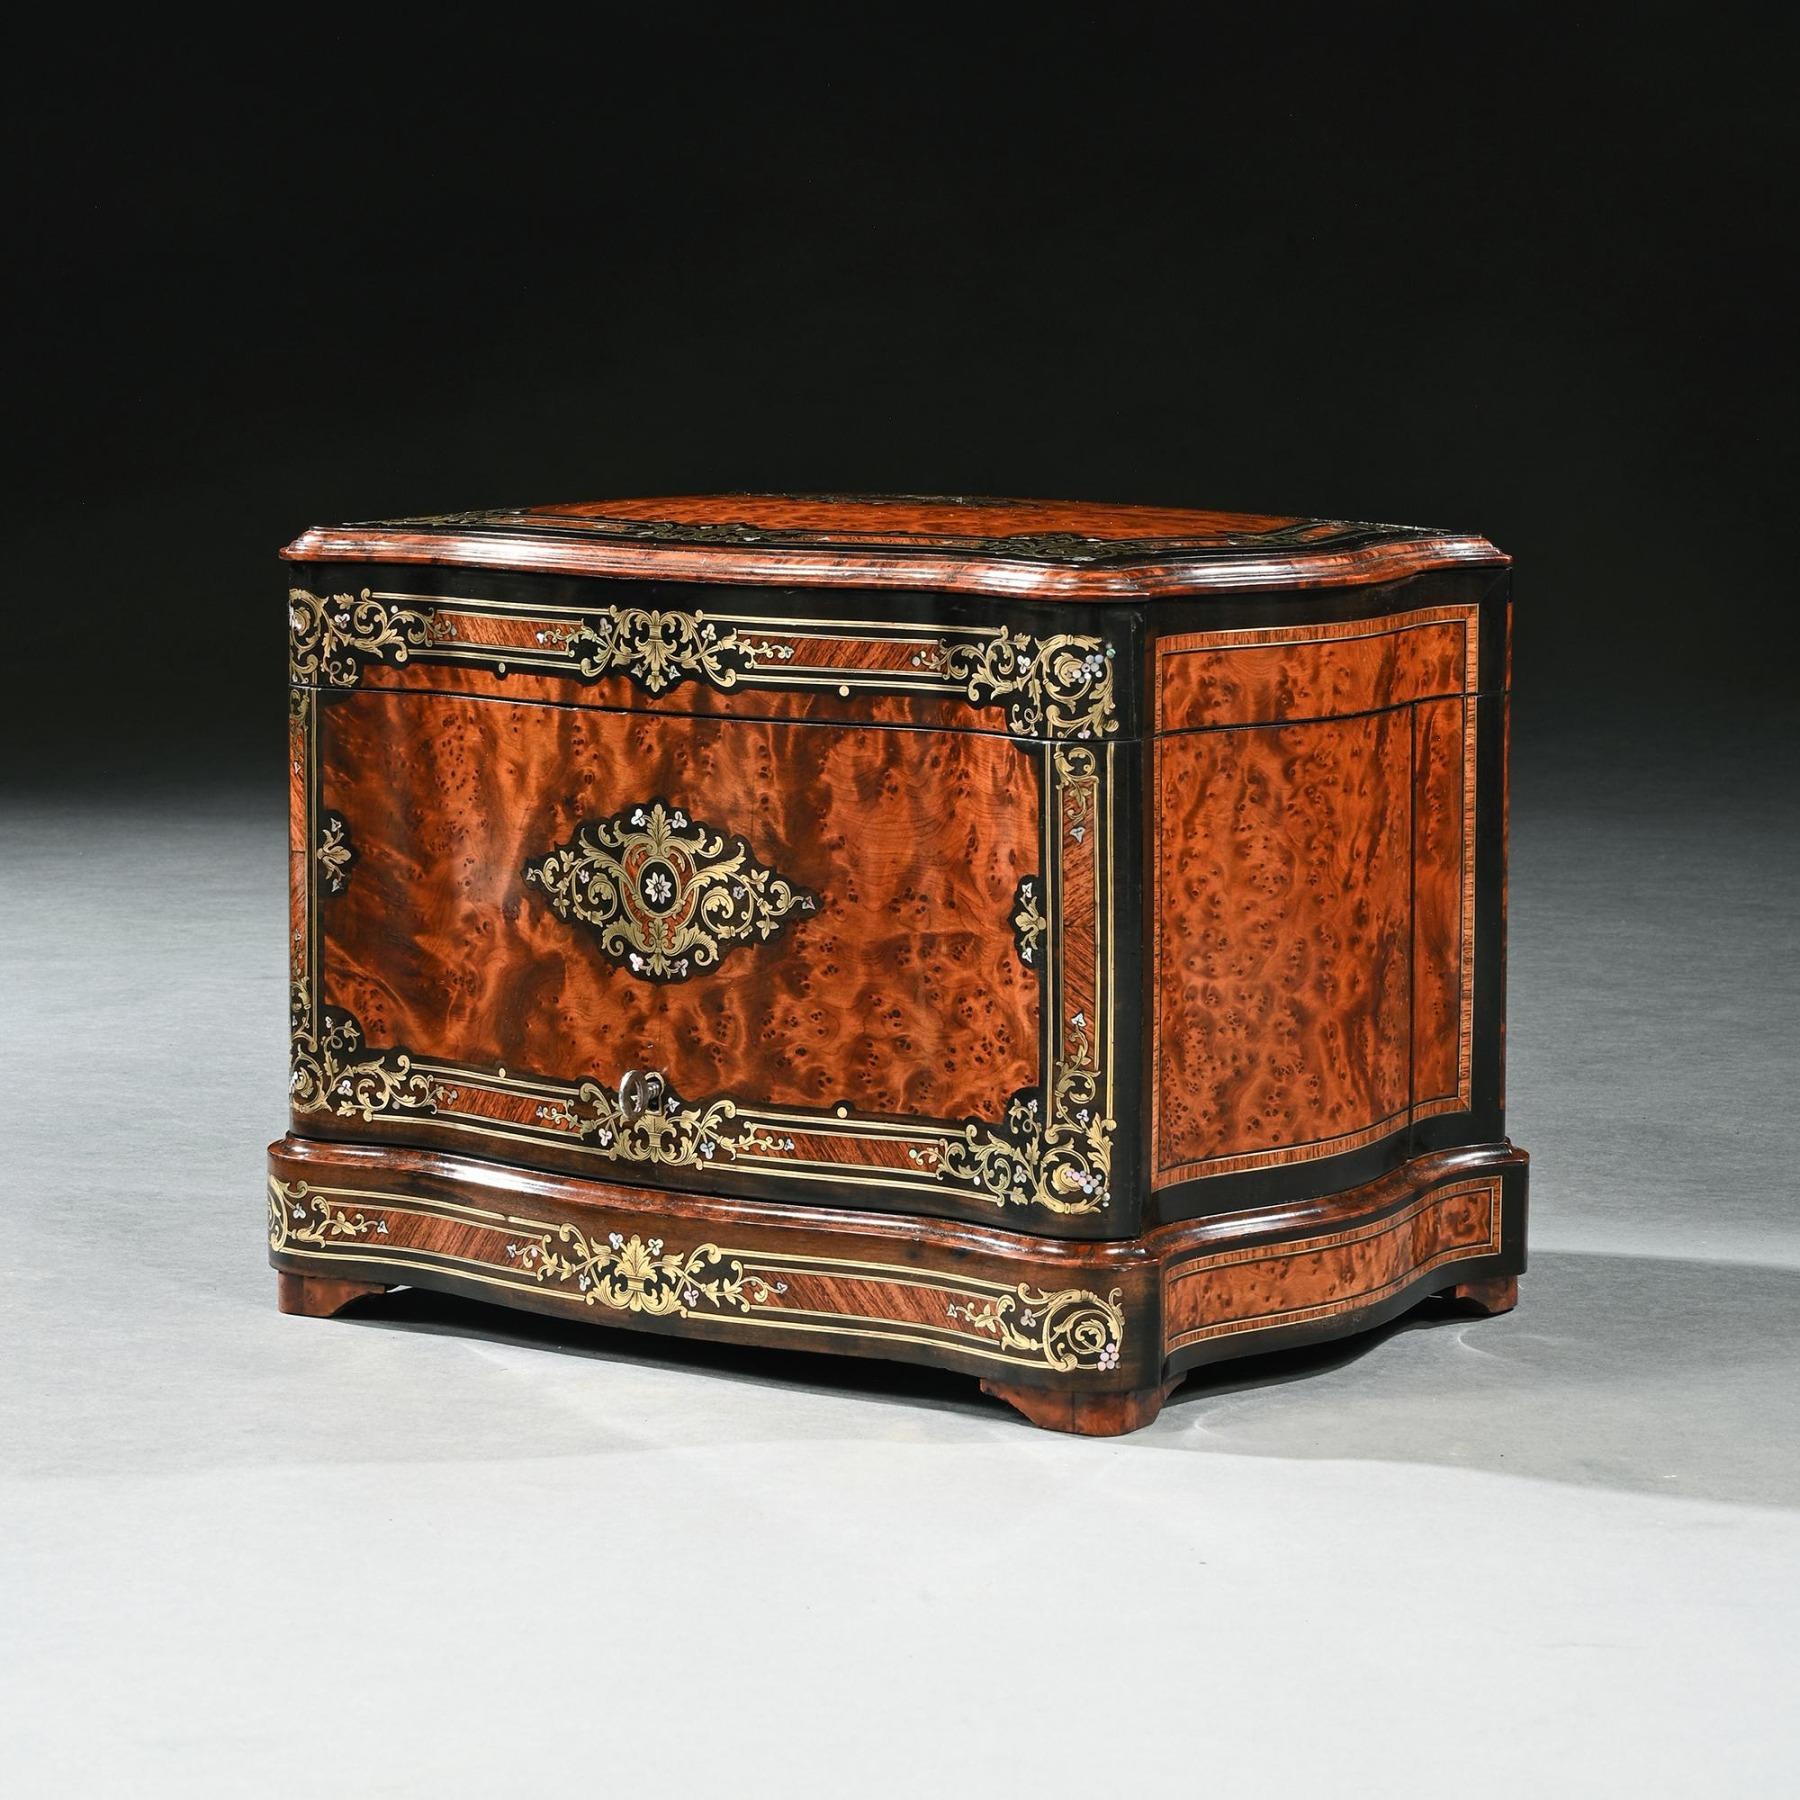 An Exceptionally Fine French Serpentine and brass marquetry inlaid Cave a Liqueur or Tantalus Box with mother of pearl.

French circa 1870
 
 Primarily veneered in fine thuya wood of wonderful colour and figure, the serpentine form of this box is